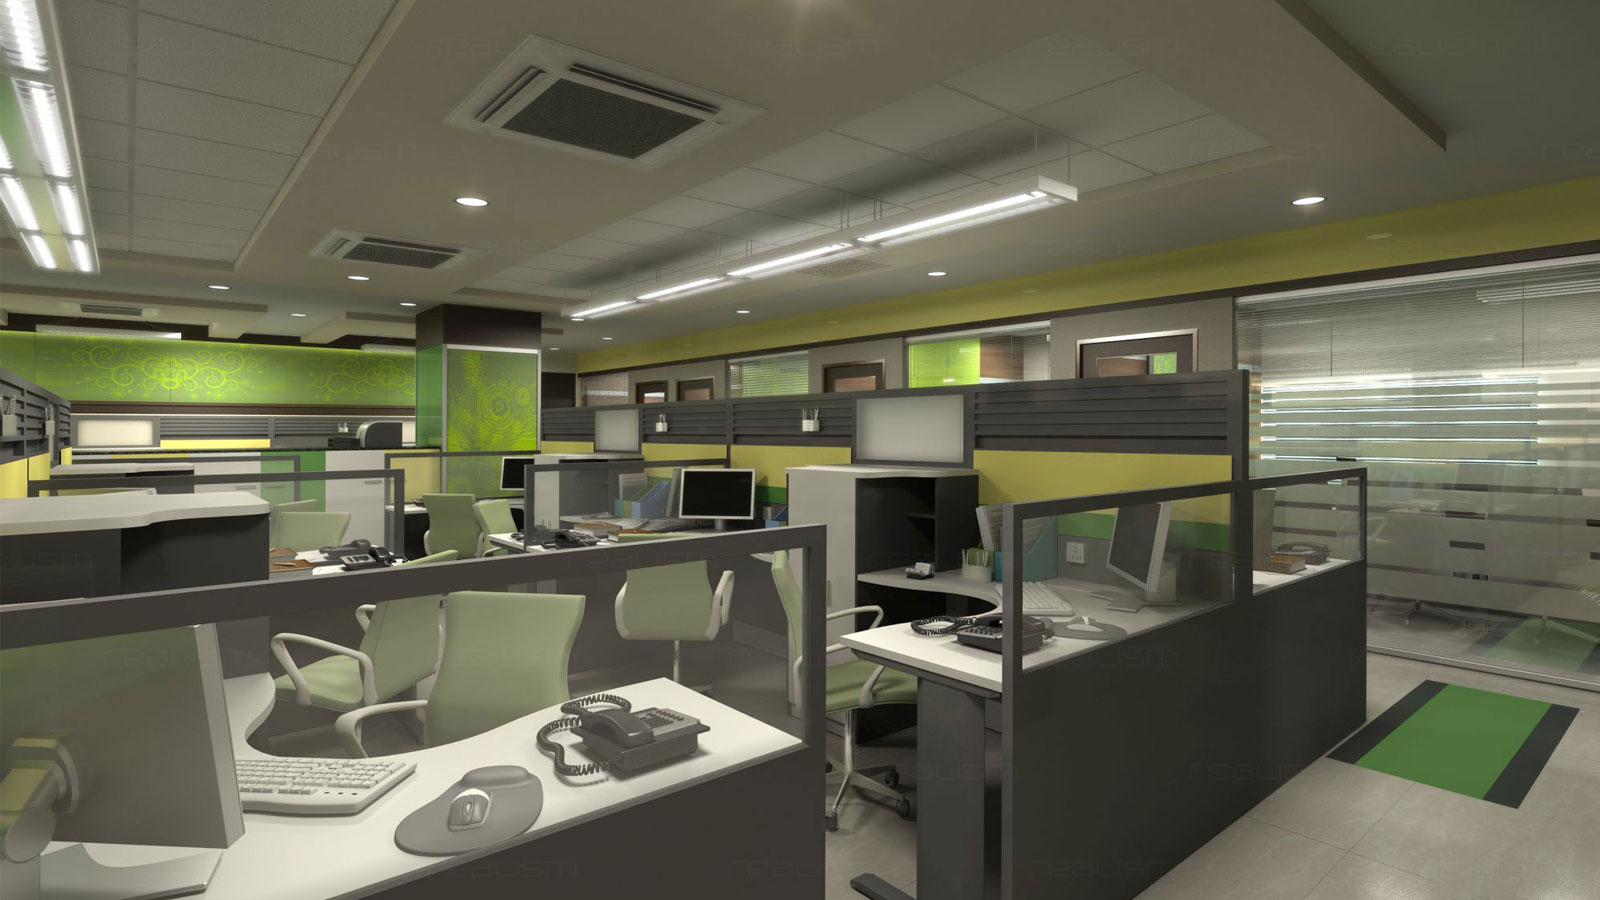 realism - Architectural 3D Visualization, 3D Rendering Services, Ahmedabad,  Gujarat, India